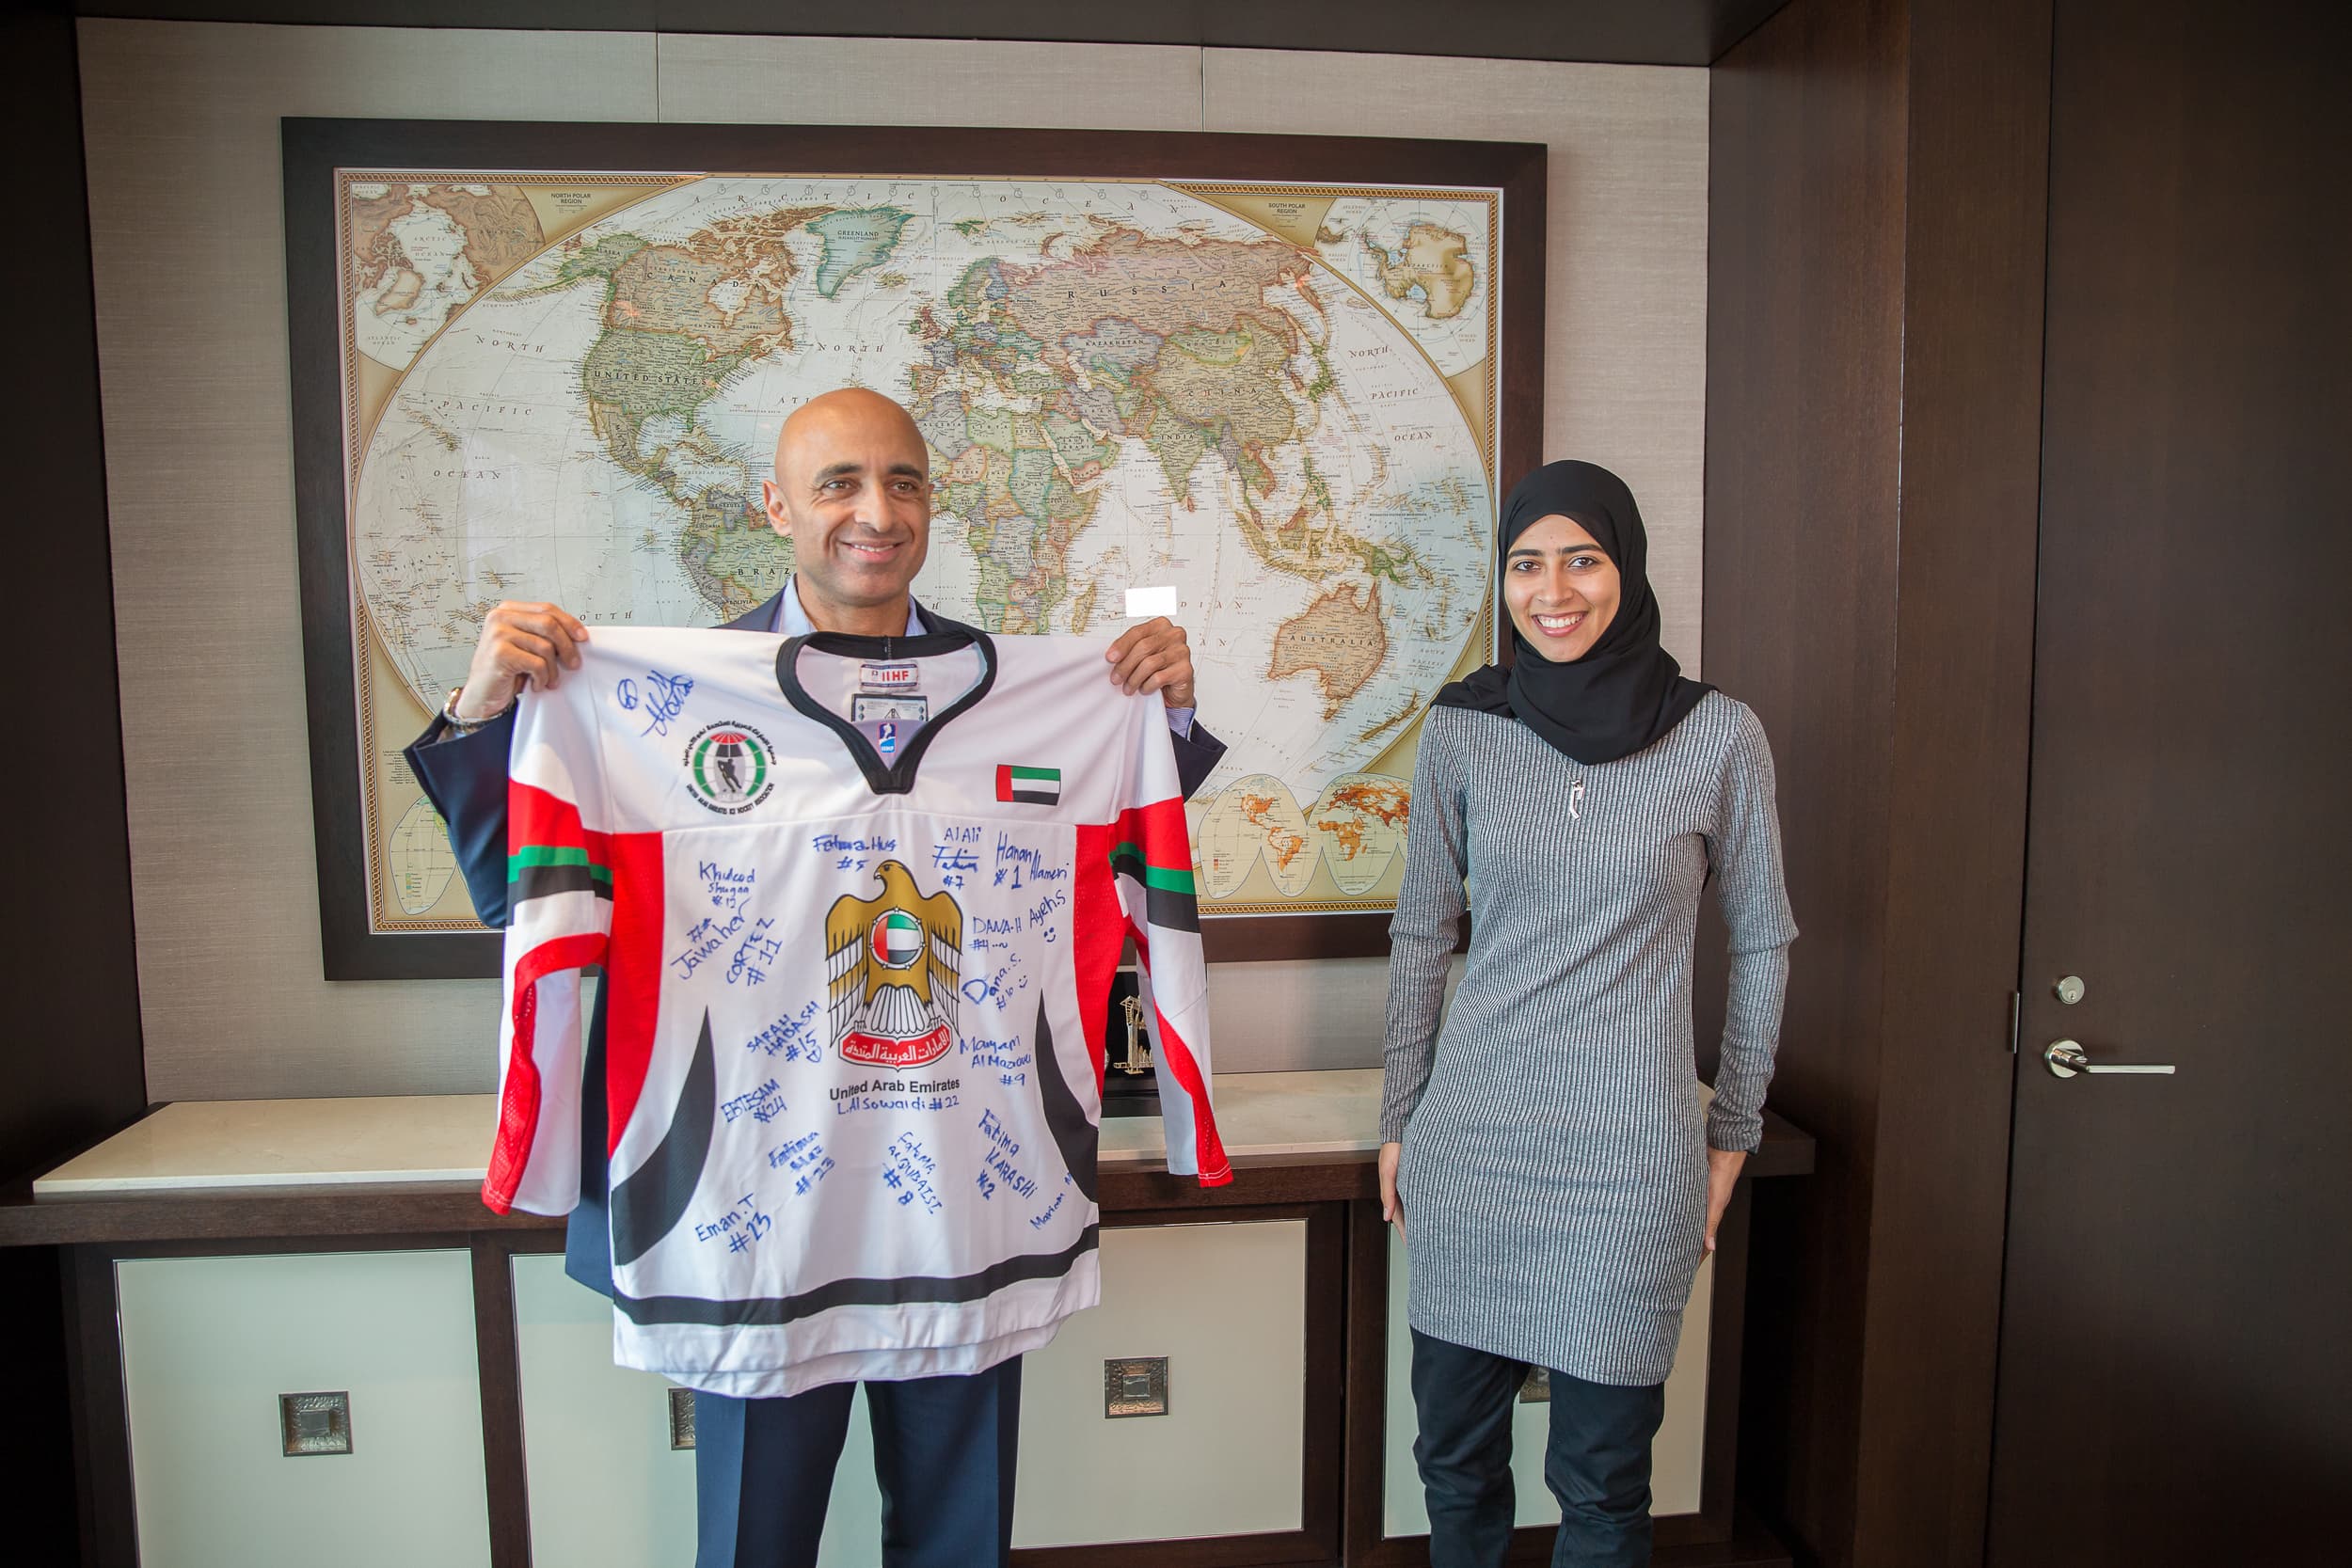 #Emirati #hockey player, Fatima Al Ali stopped by the embassy in Washington, #DC to present Ambassador Yousef Al #Otaiba with a jersey signed by Fatima's team members and to discuss the expanding role #UAE women are playing in a wide range of sports, physical fitness, training and coaching. #UAEUSA #Caps #NHL #Etihad